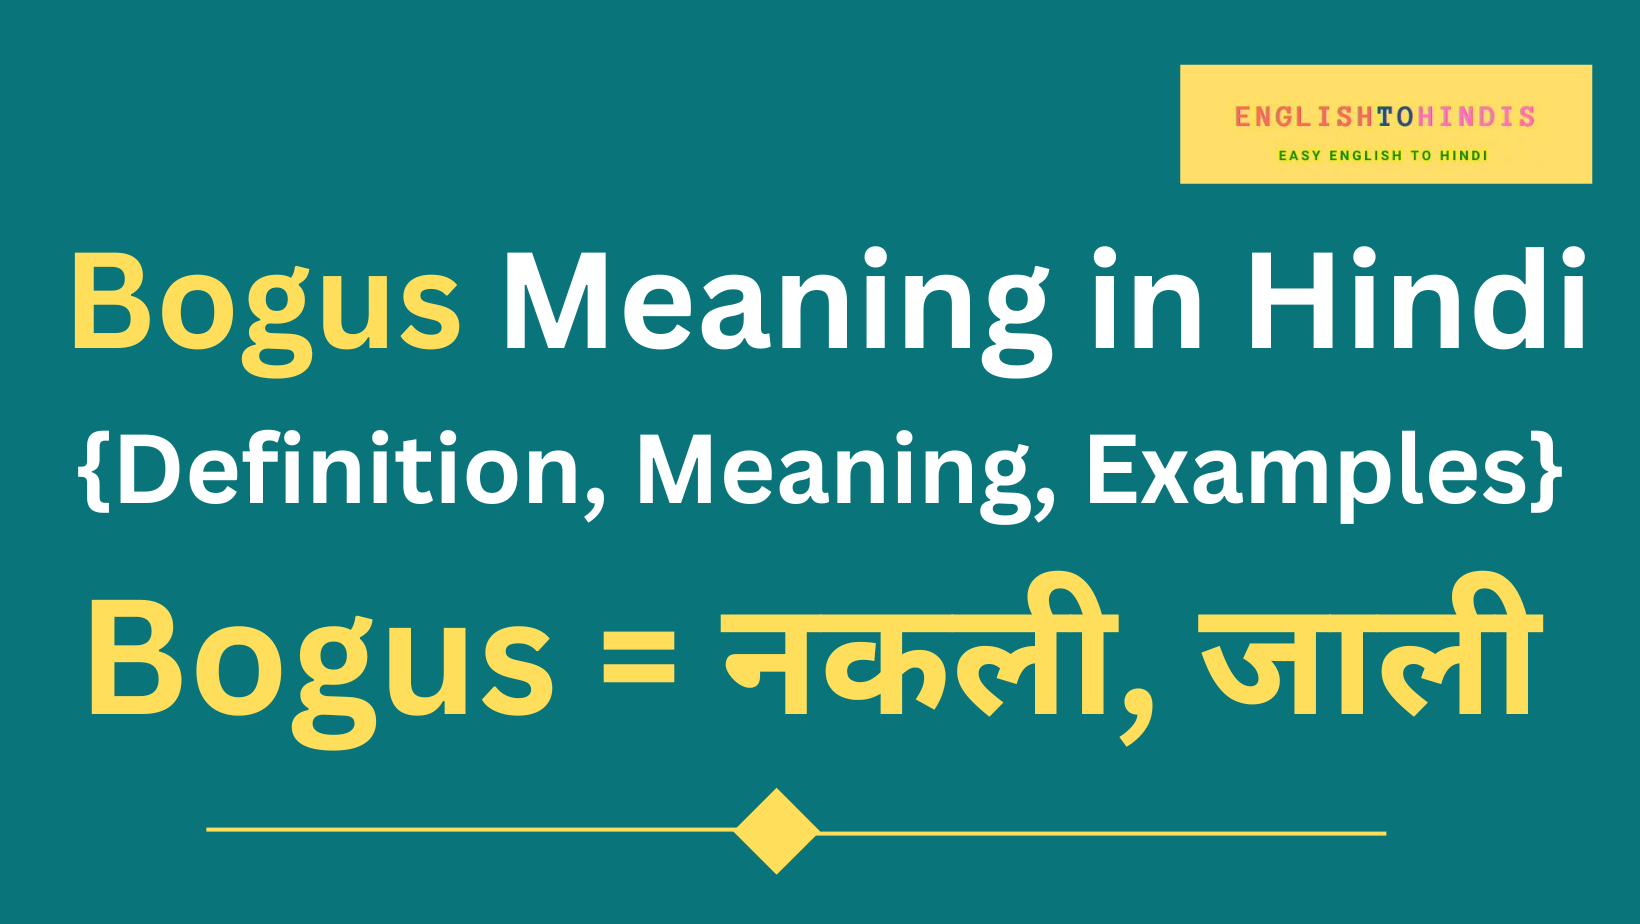 Bogus Meaning in Hindi